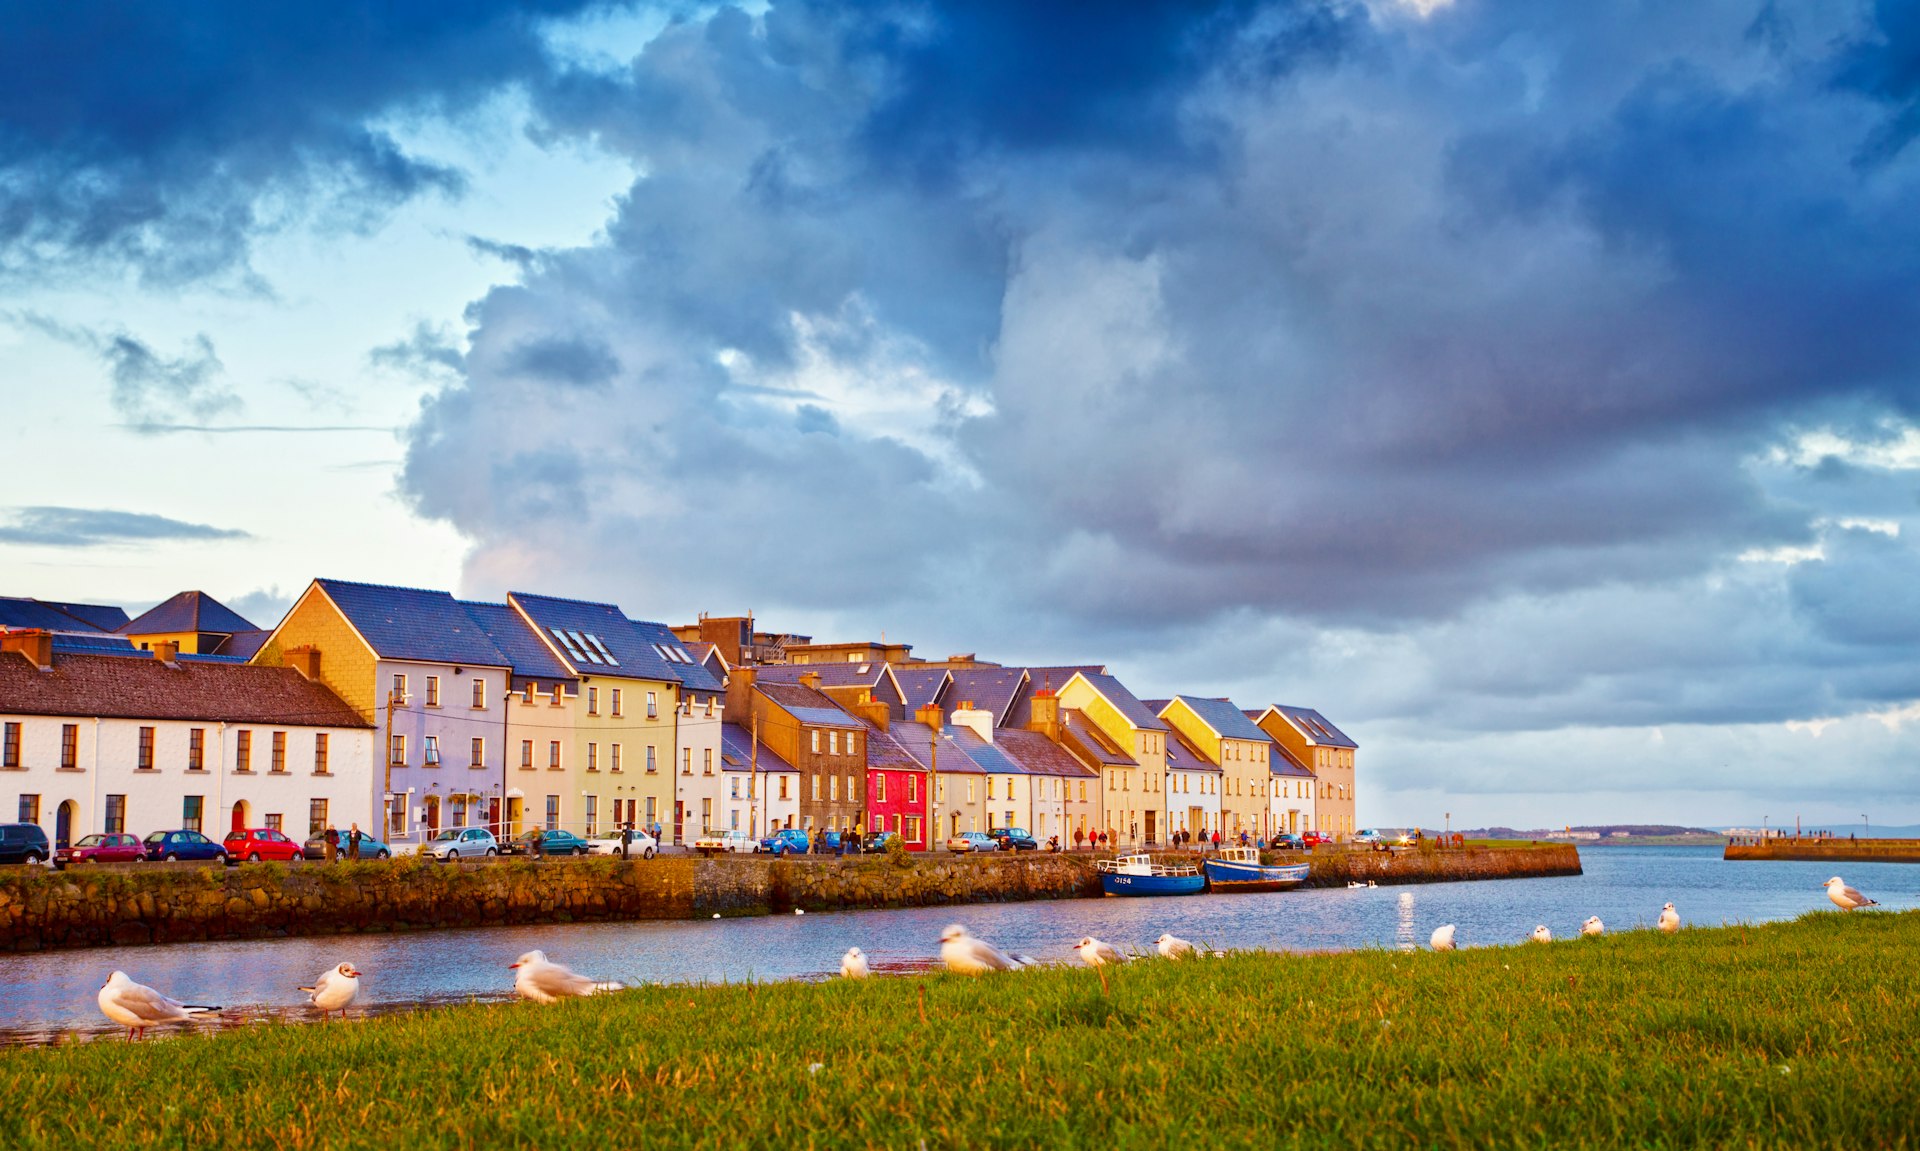 Late evening sunlight on colourful waterfront houses in Galway City.